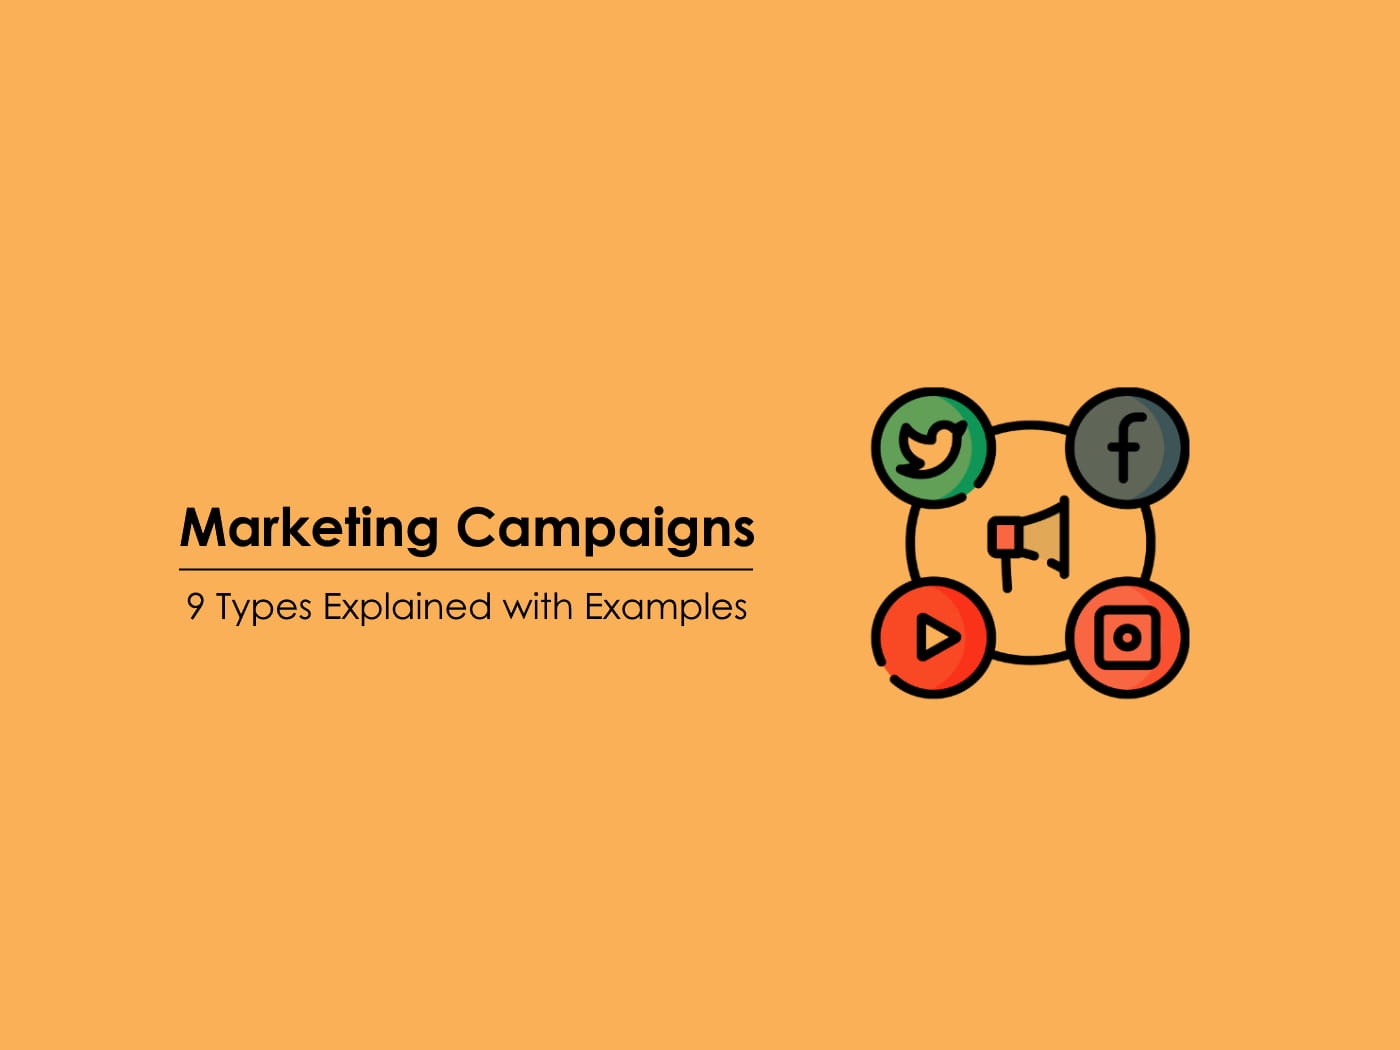 types of marketing campaigns